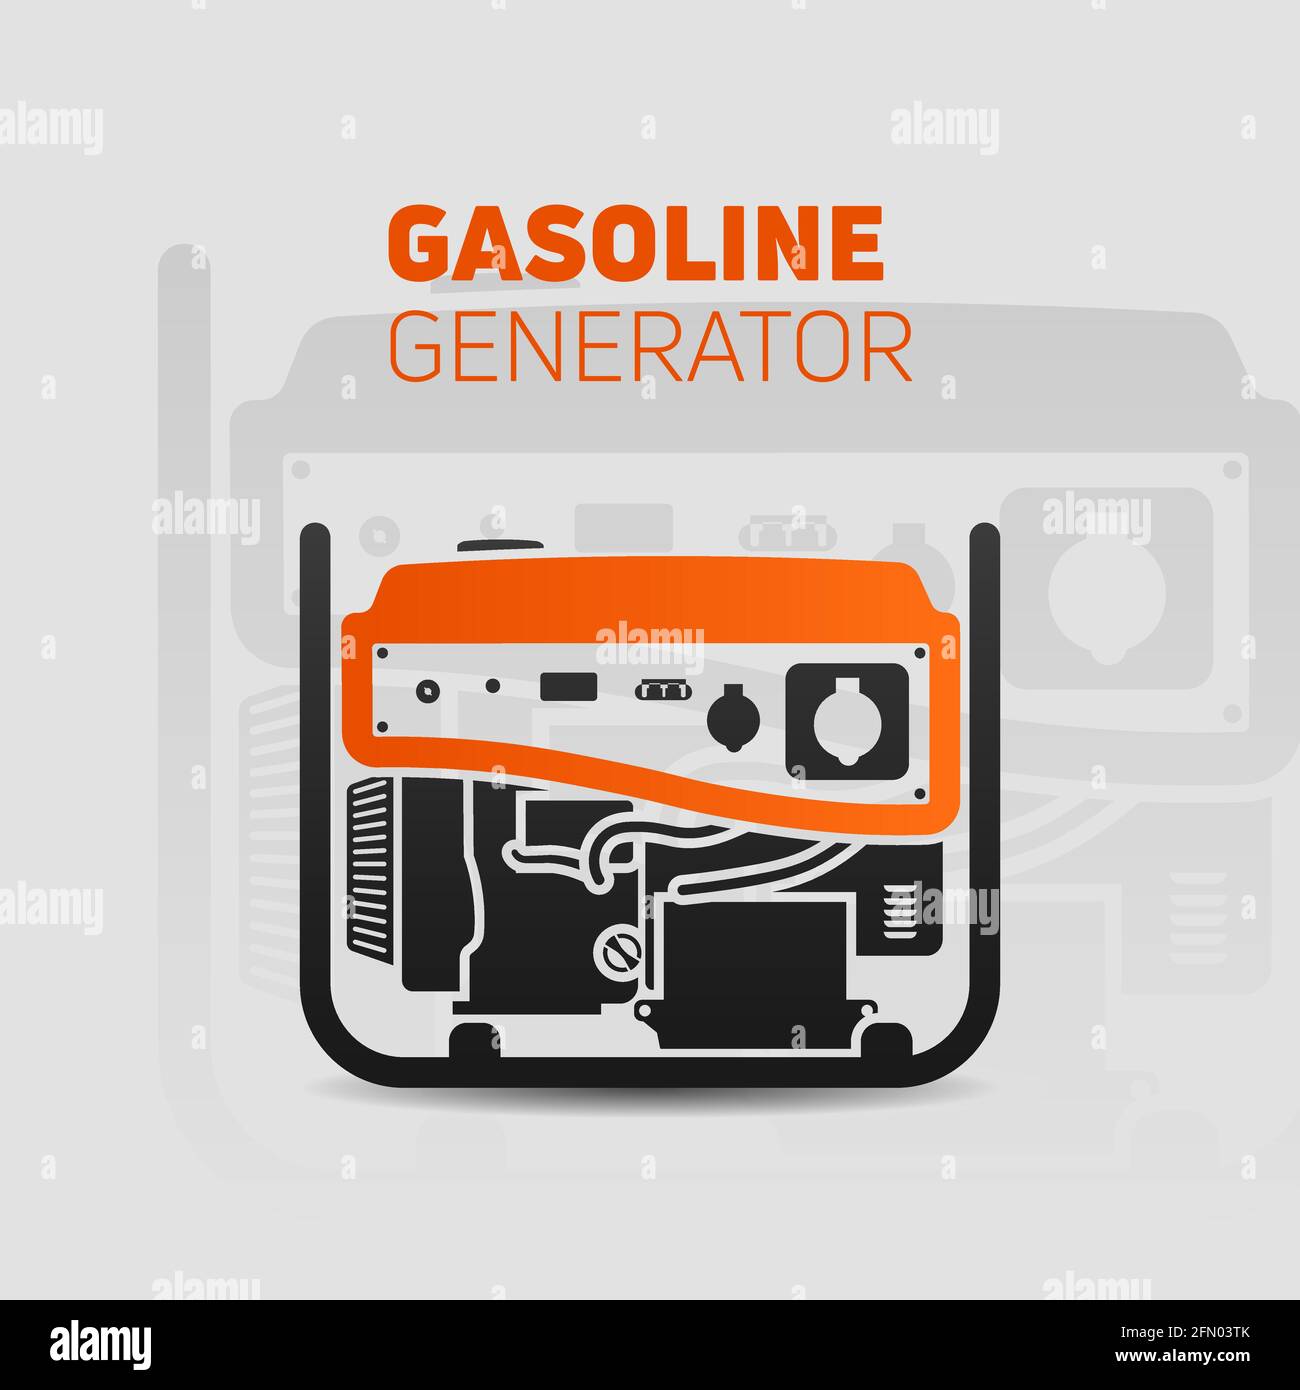 Gasoline generator vector with yellow accent illustration template. Easy to edit, change size, color. Stock Vector